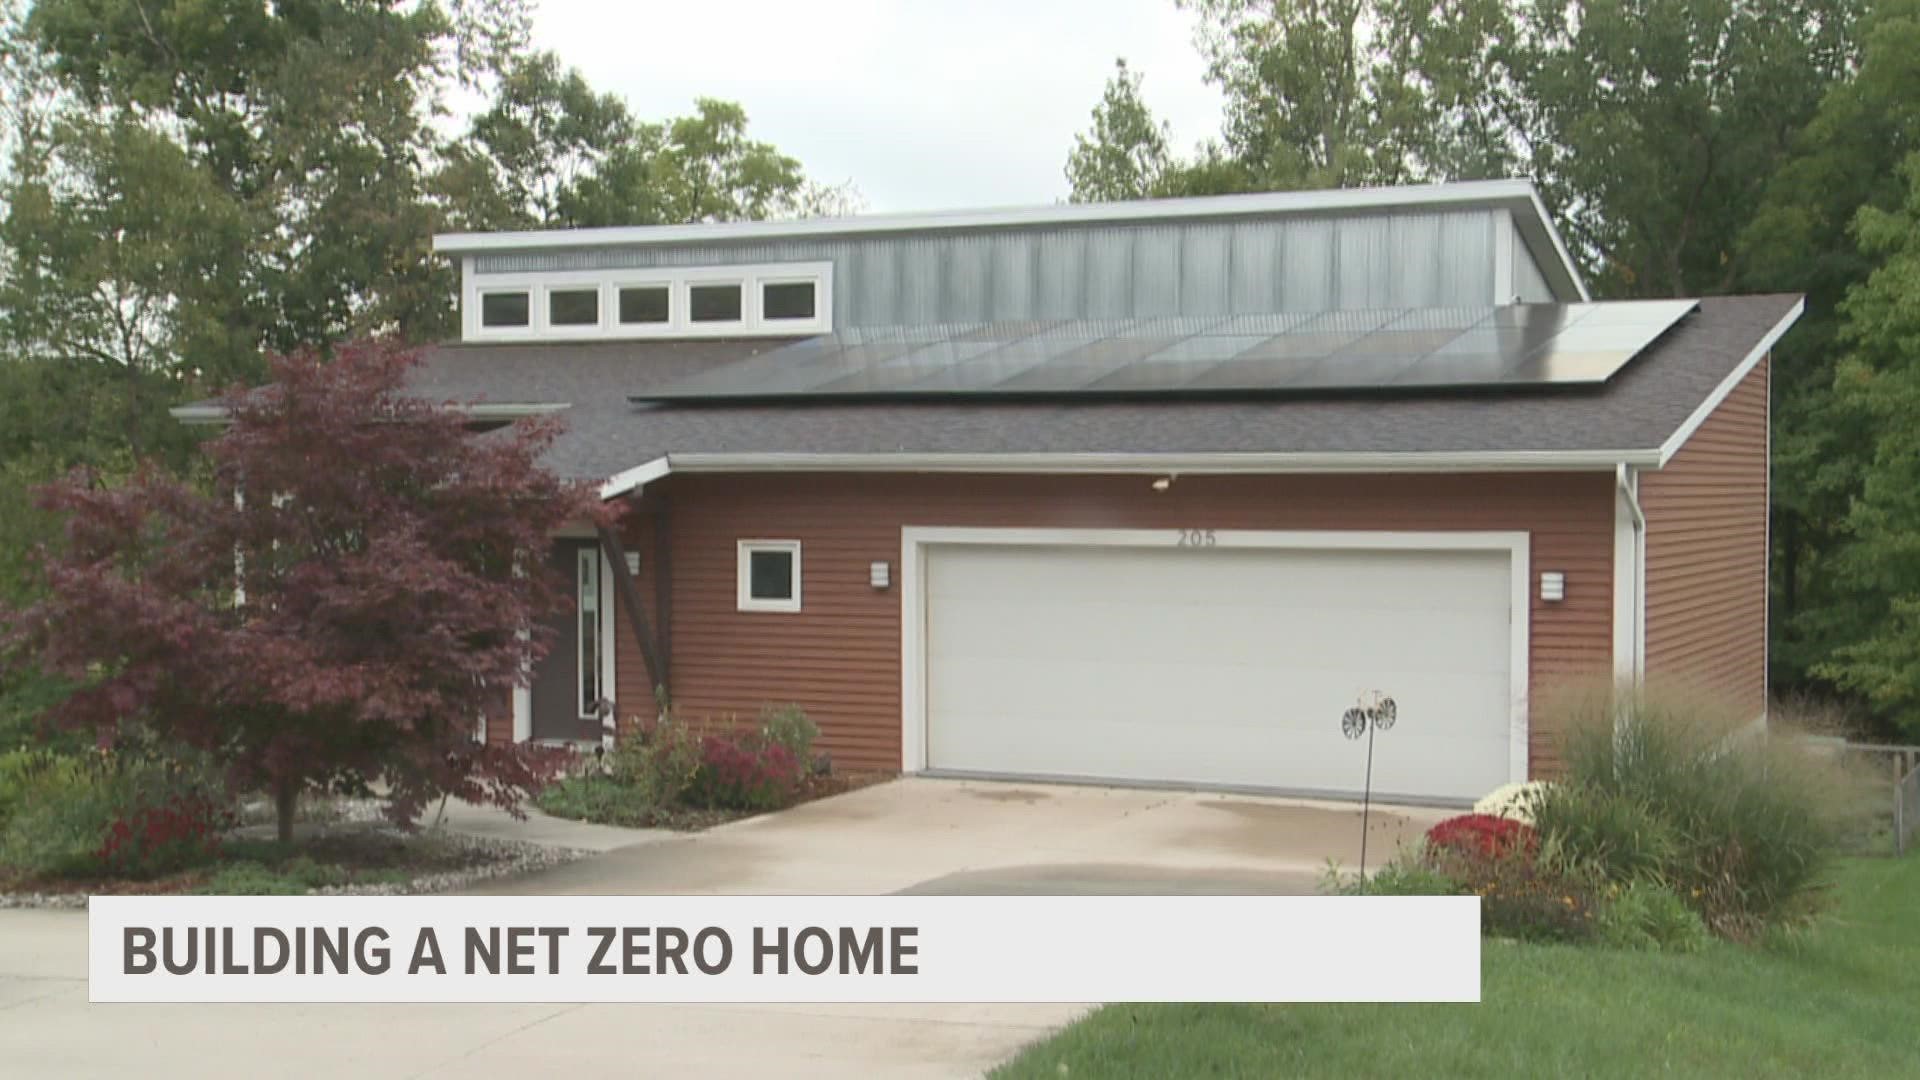 Built from the ground up, this home was designed to be 100% energy efficient.